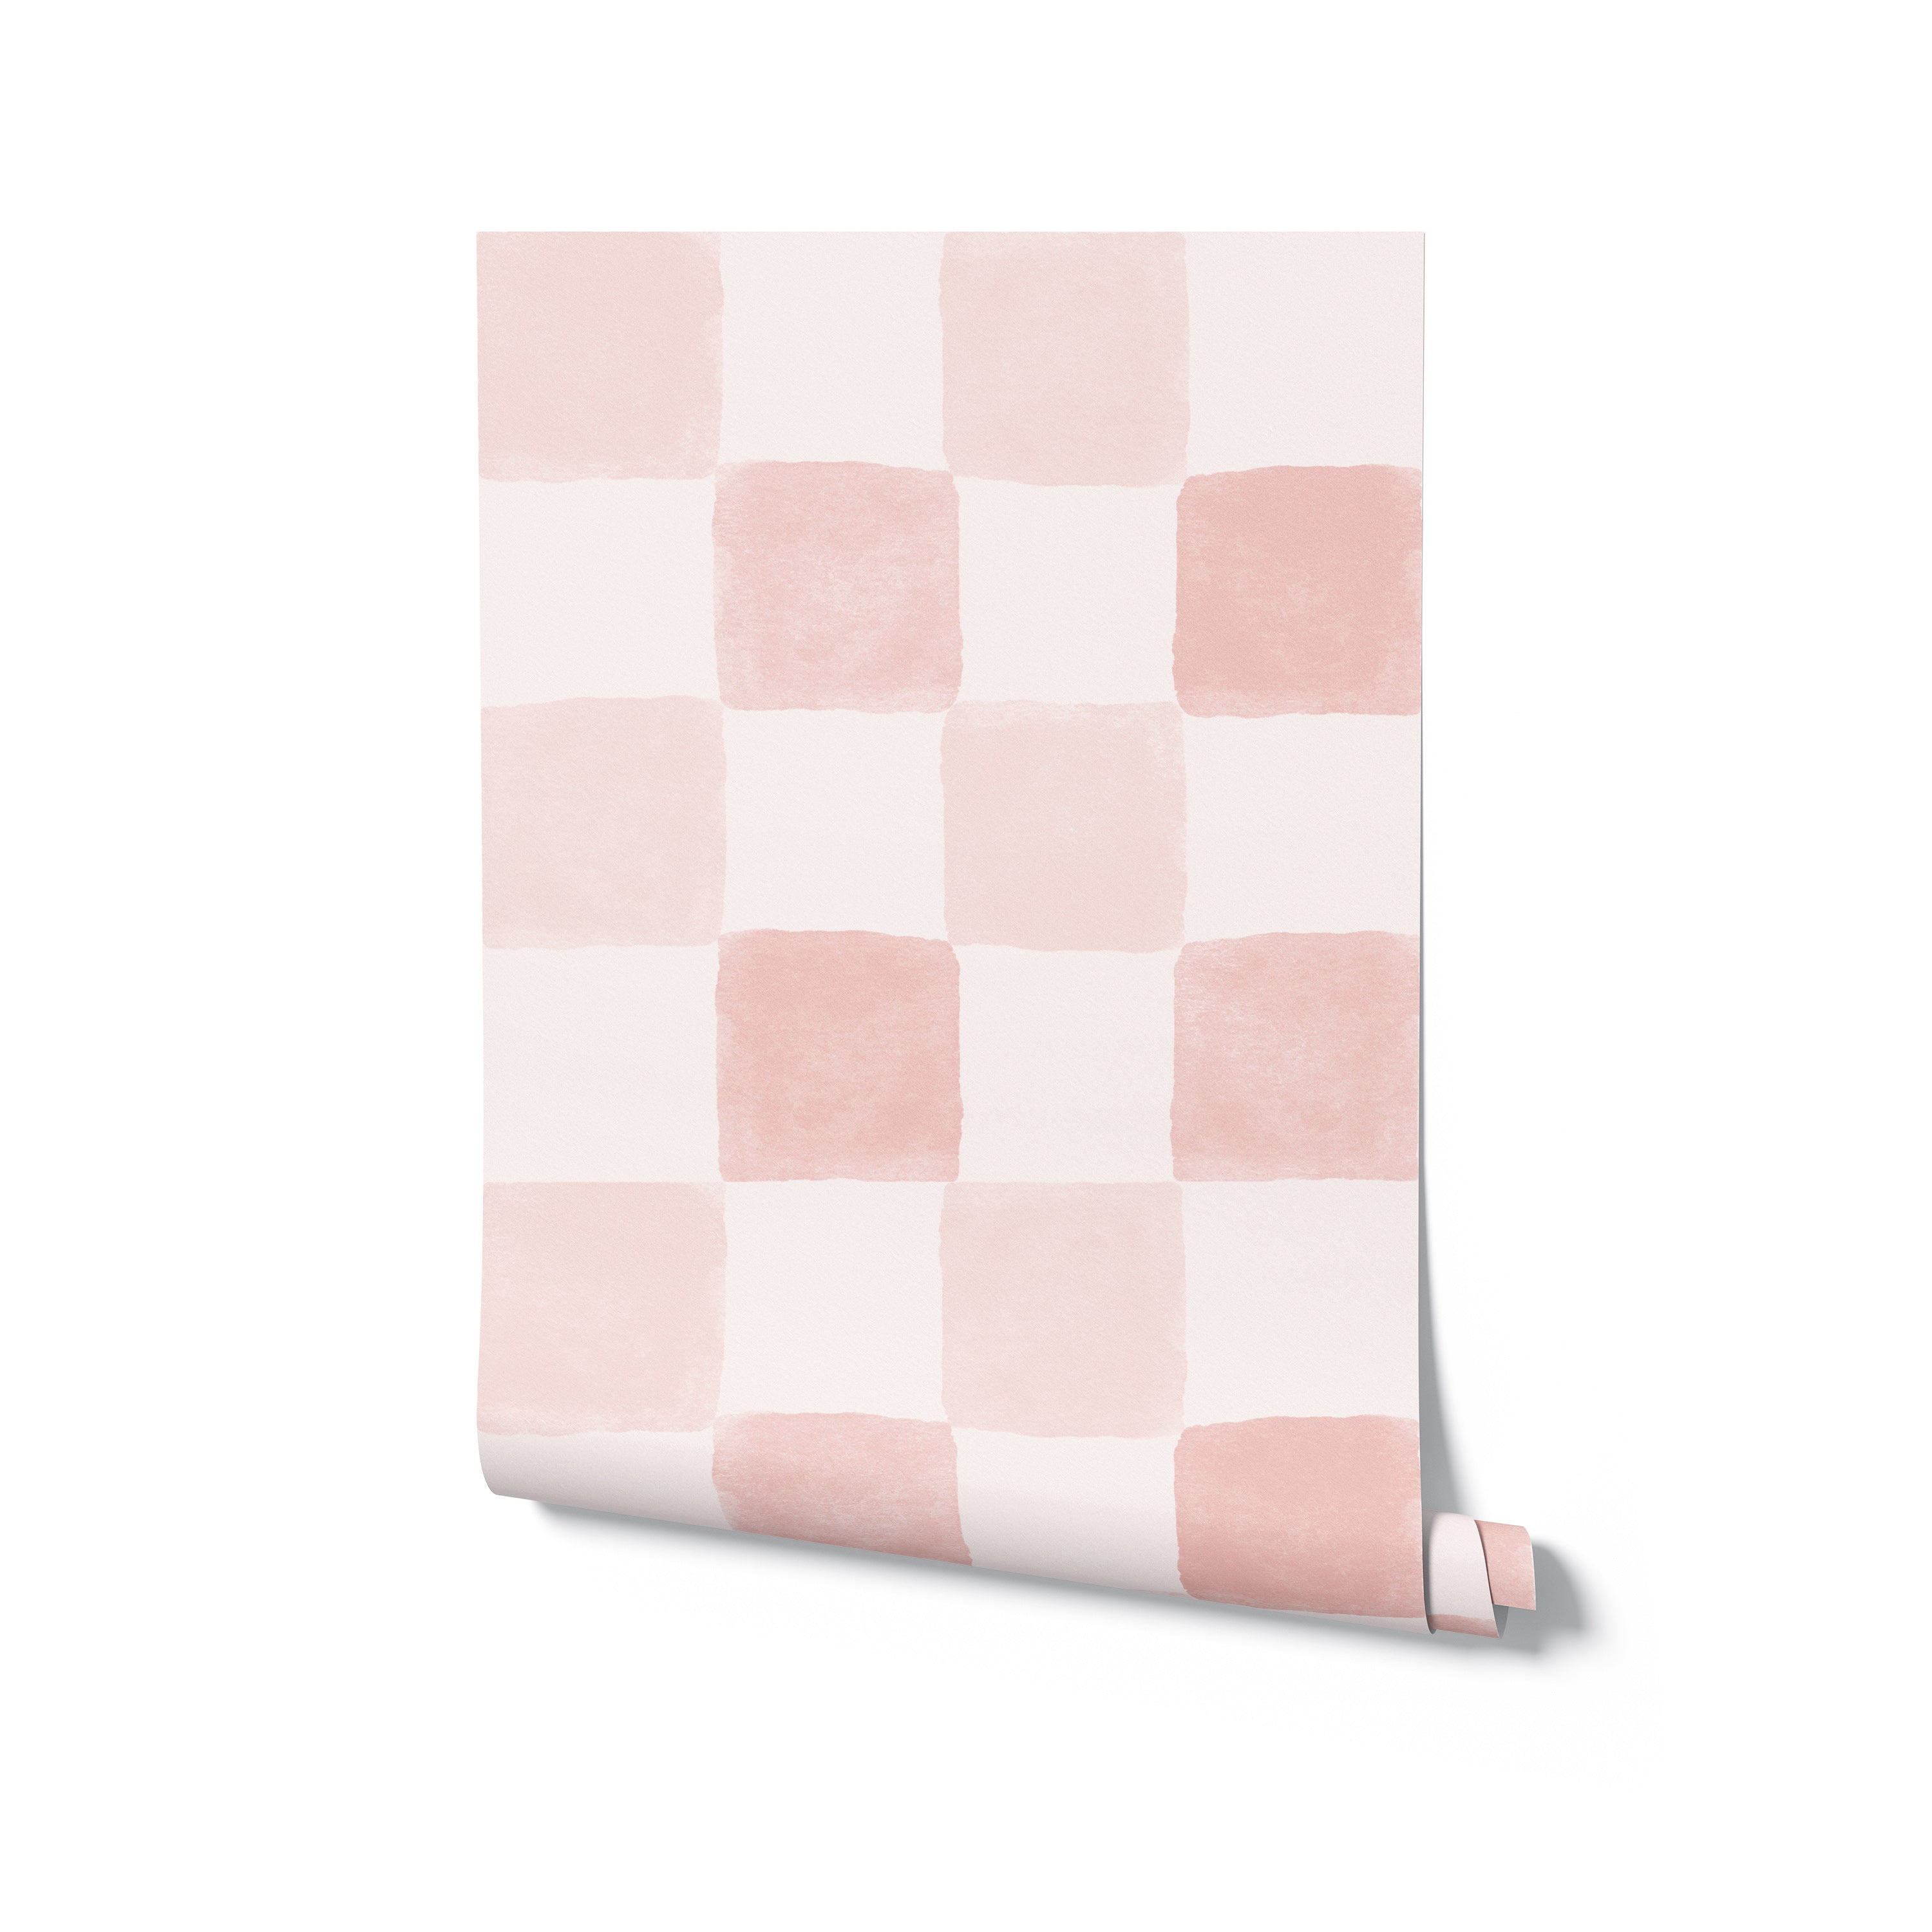 A rolled-out segment of the Clémence Wallpaper in Dusty Pink, displaying the soft watercolor checkered pattern of dusty pink and white squares, perfect for adding a gentle touch of color to modern interiors.